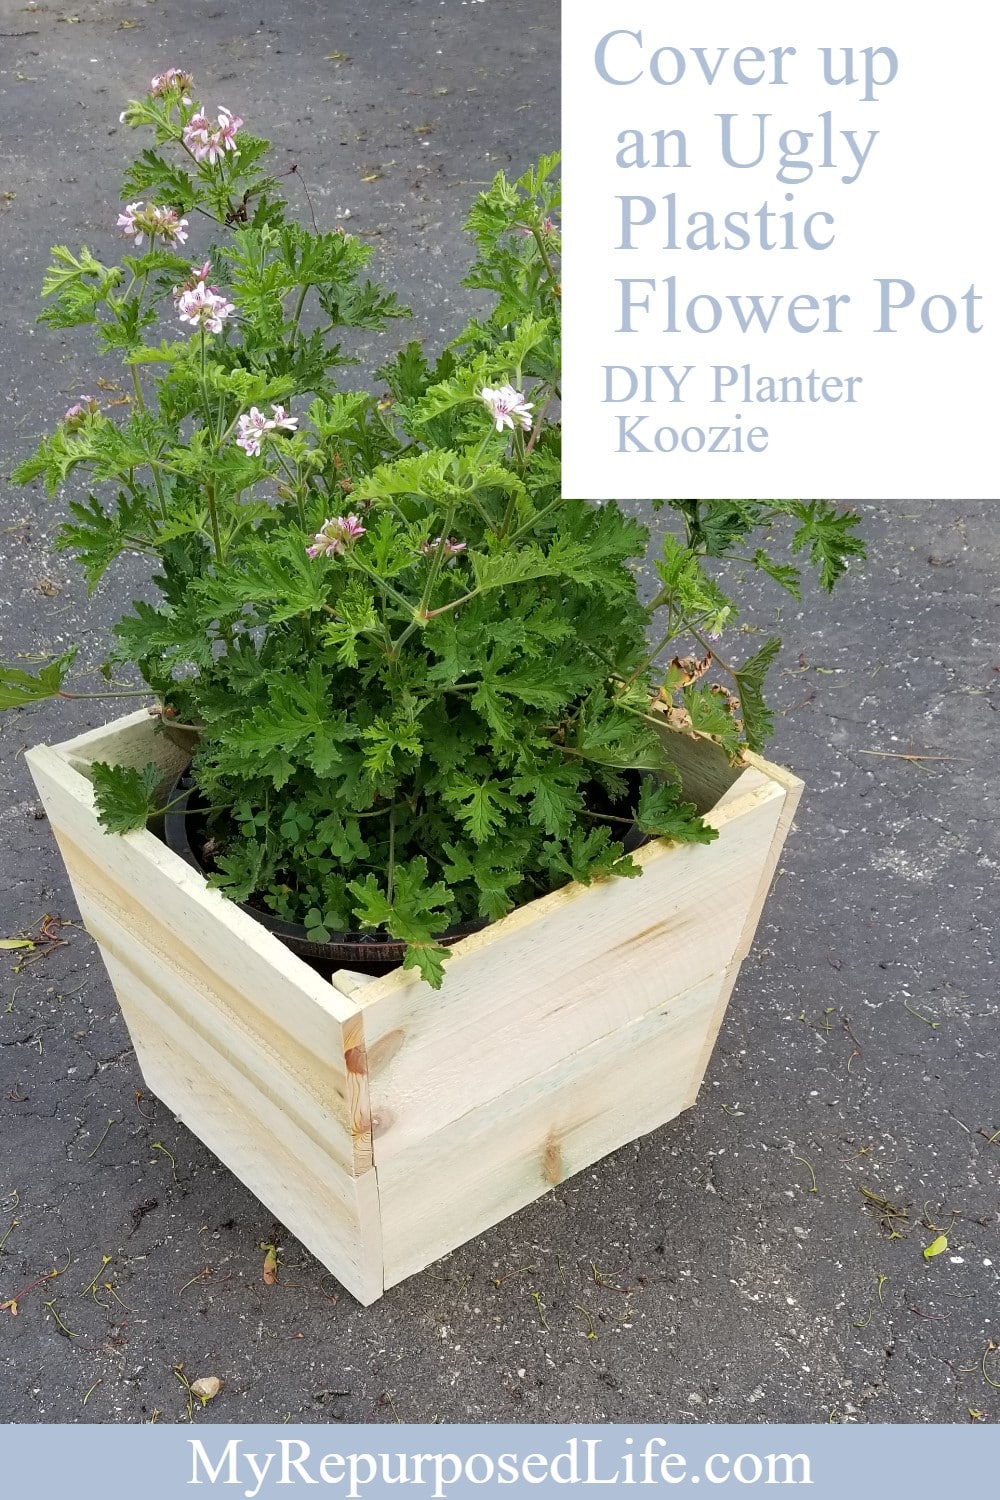 You have a new plant in an ugly flower pot? No problem. Let me show you how to make an easy DIY Plant Koozie out of inexpensive fence boards. Awesome way to display your potted plants on your patio. Step by step directions from #MyRepurposedLife via @repurposedlife